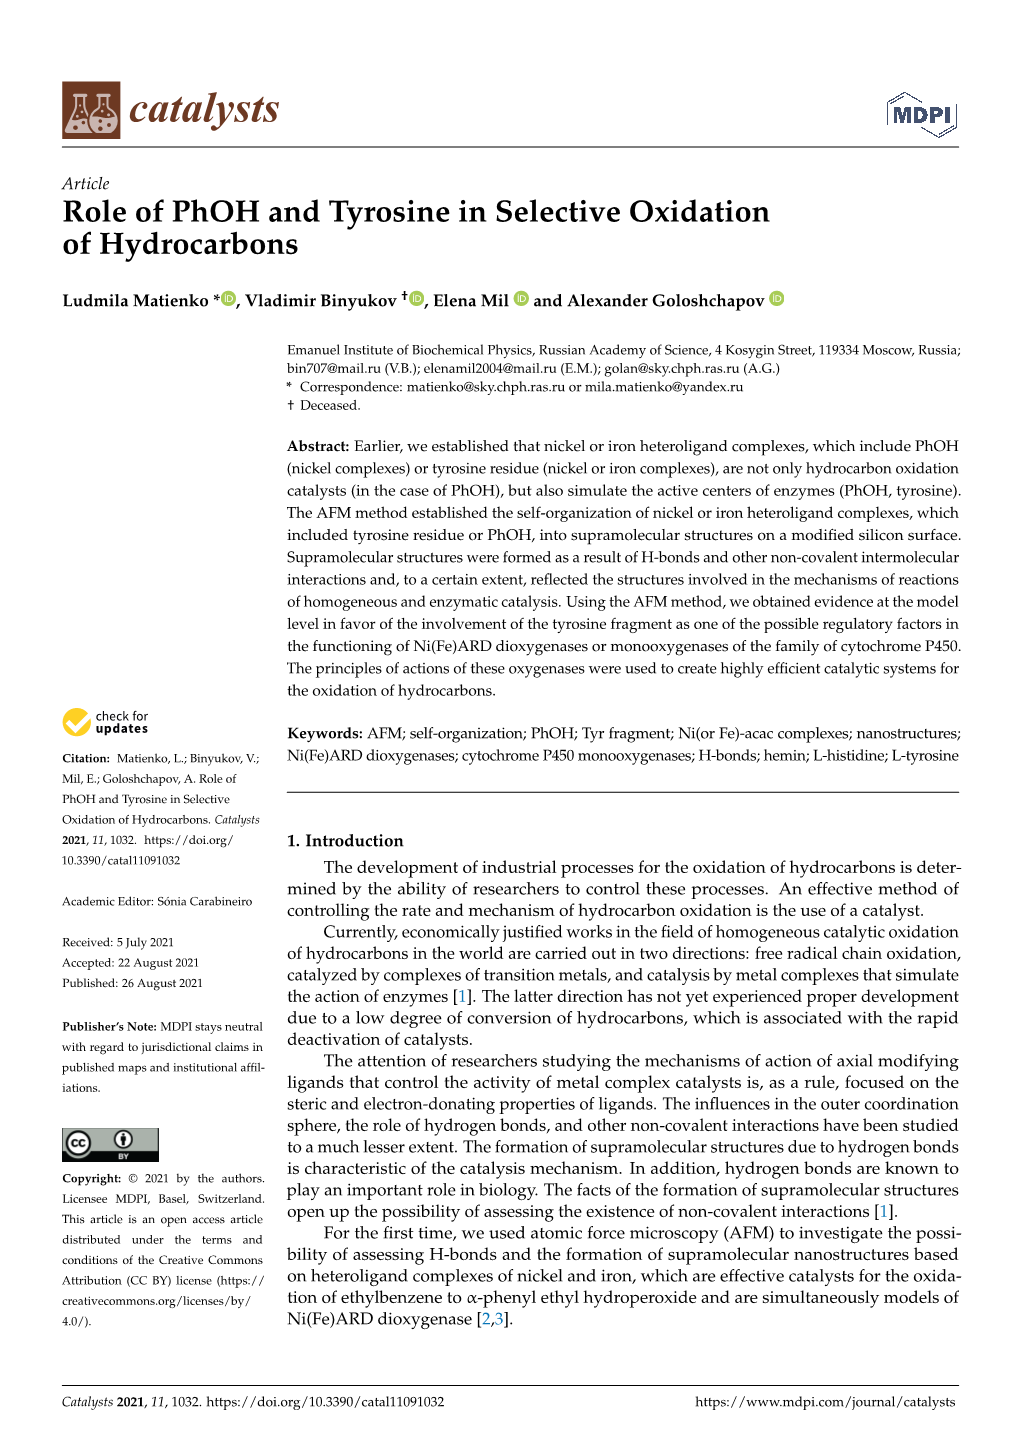 Role of Phoh and Tyrosine in Selective Oxidation of Hydrocarbons